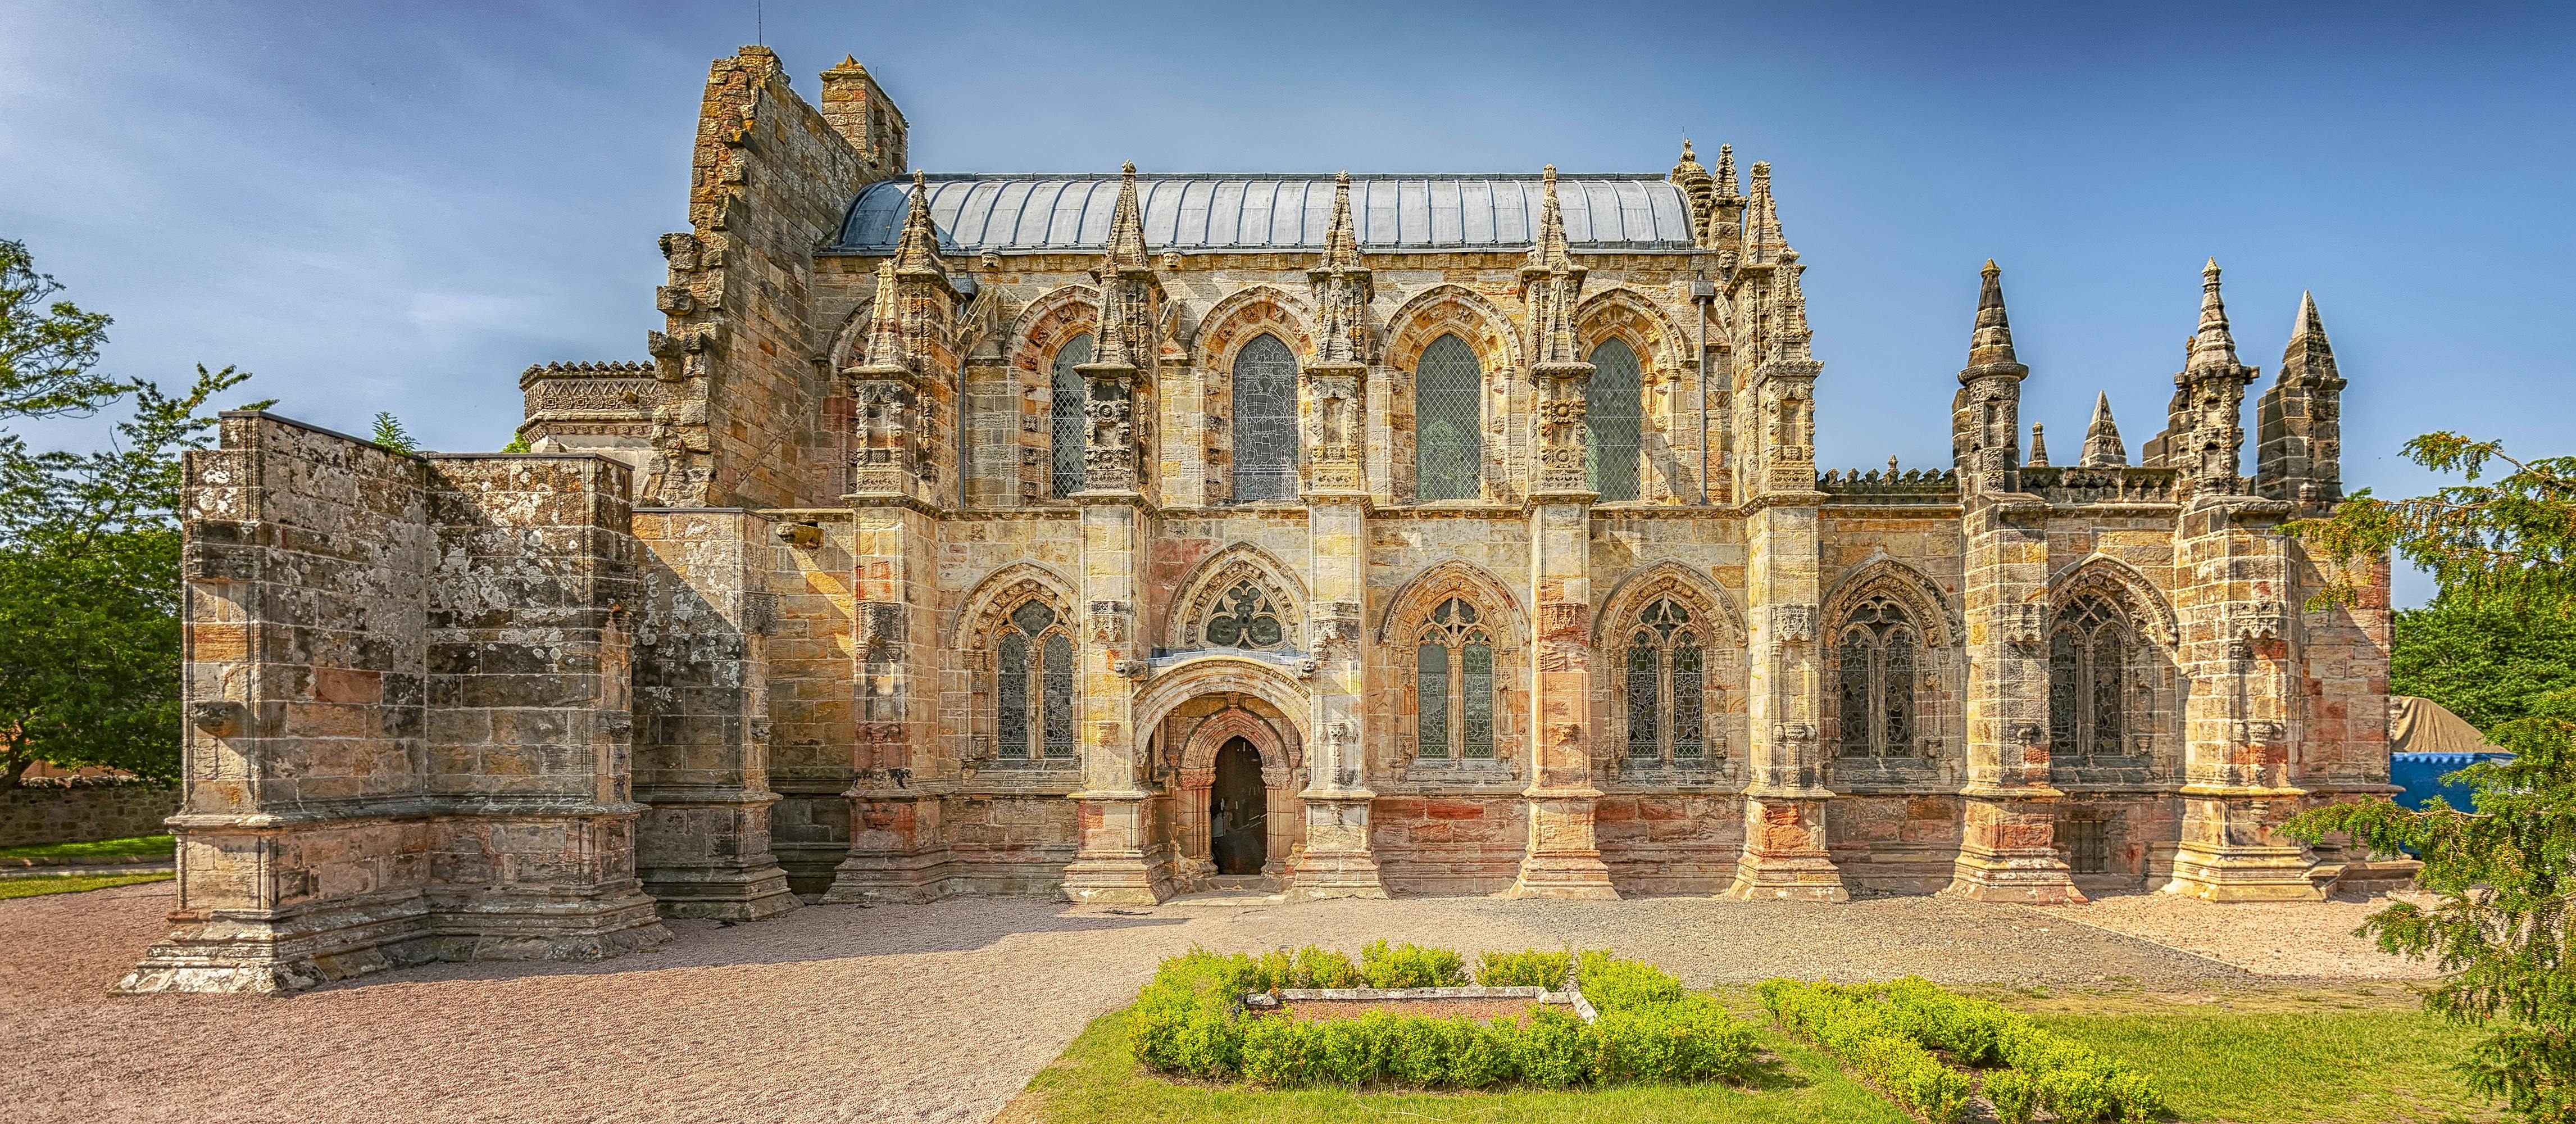 From Edinburgh to Rosslyn Chapel, Glenkinchie Distillery and more